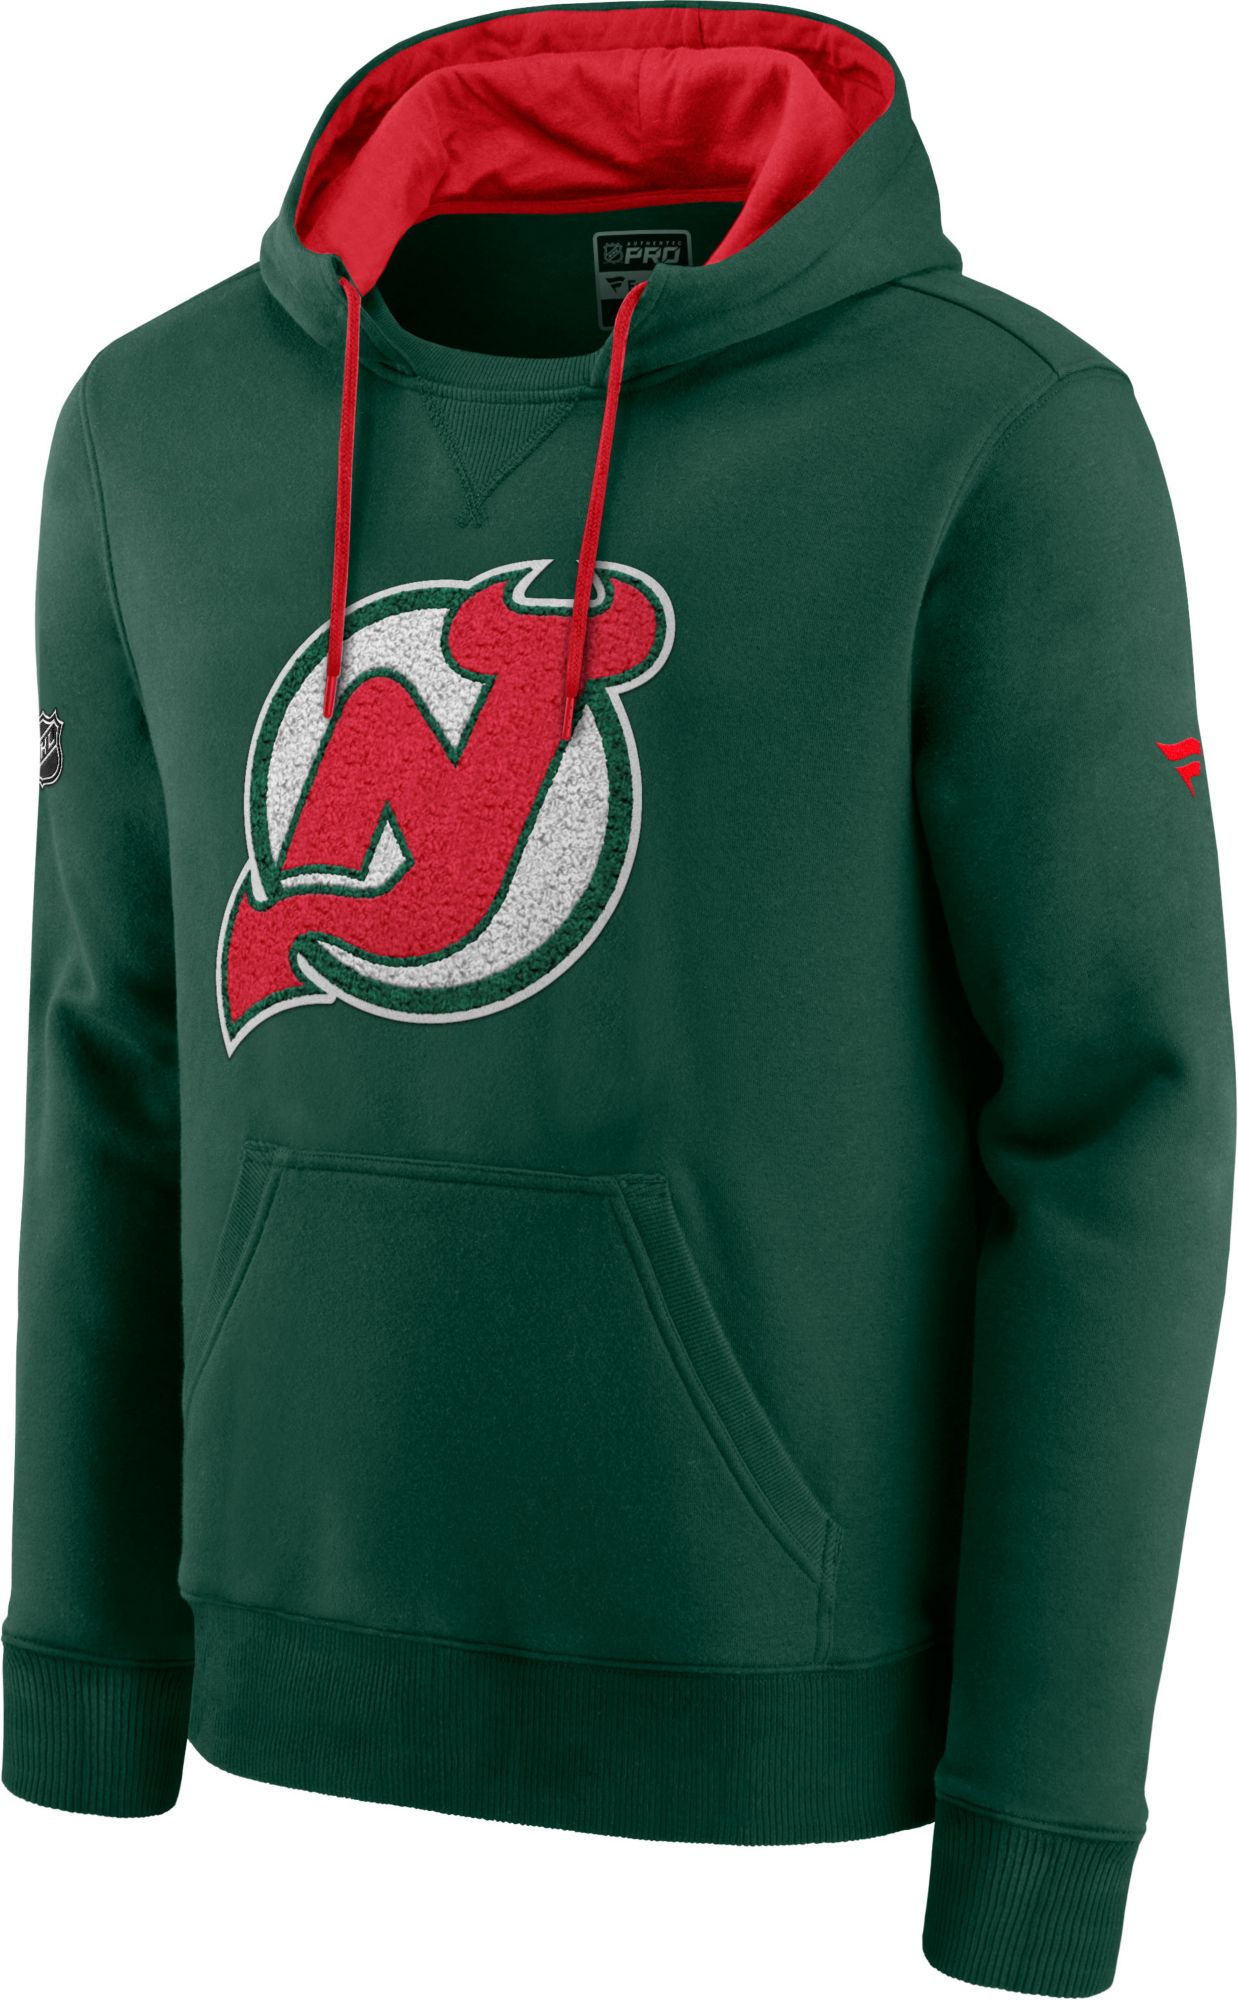 New Jersey Devils Women's Apparel  Curbside Pickup Available at DICK'S